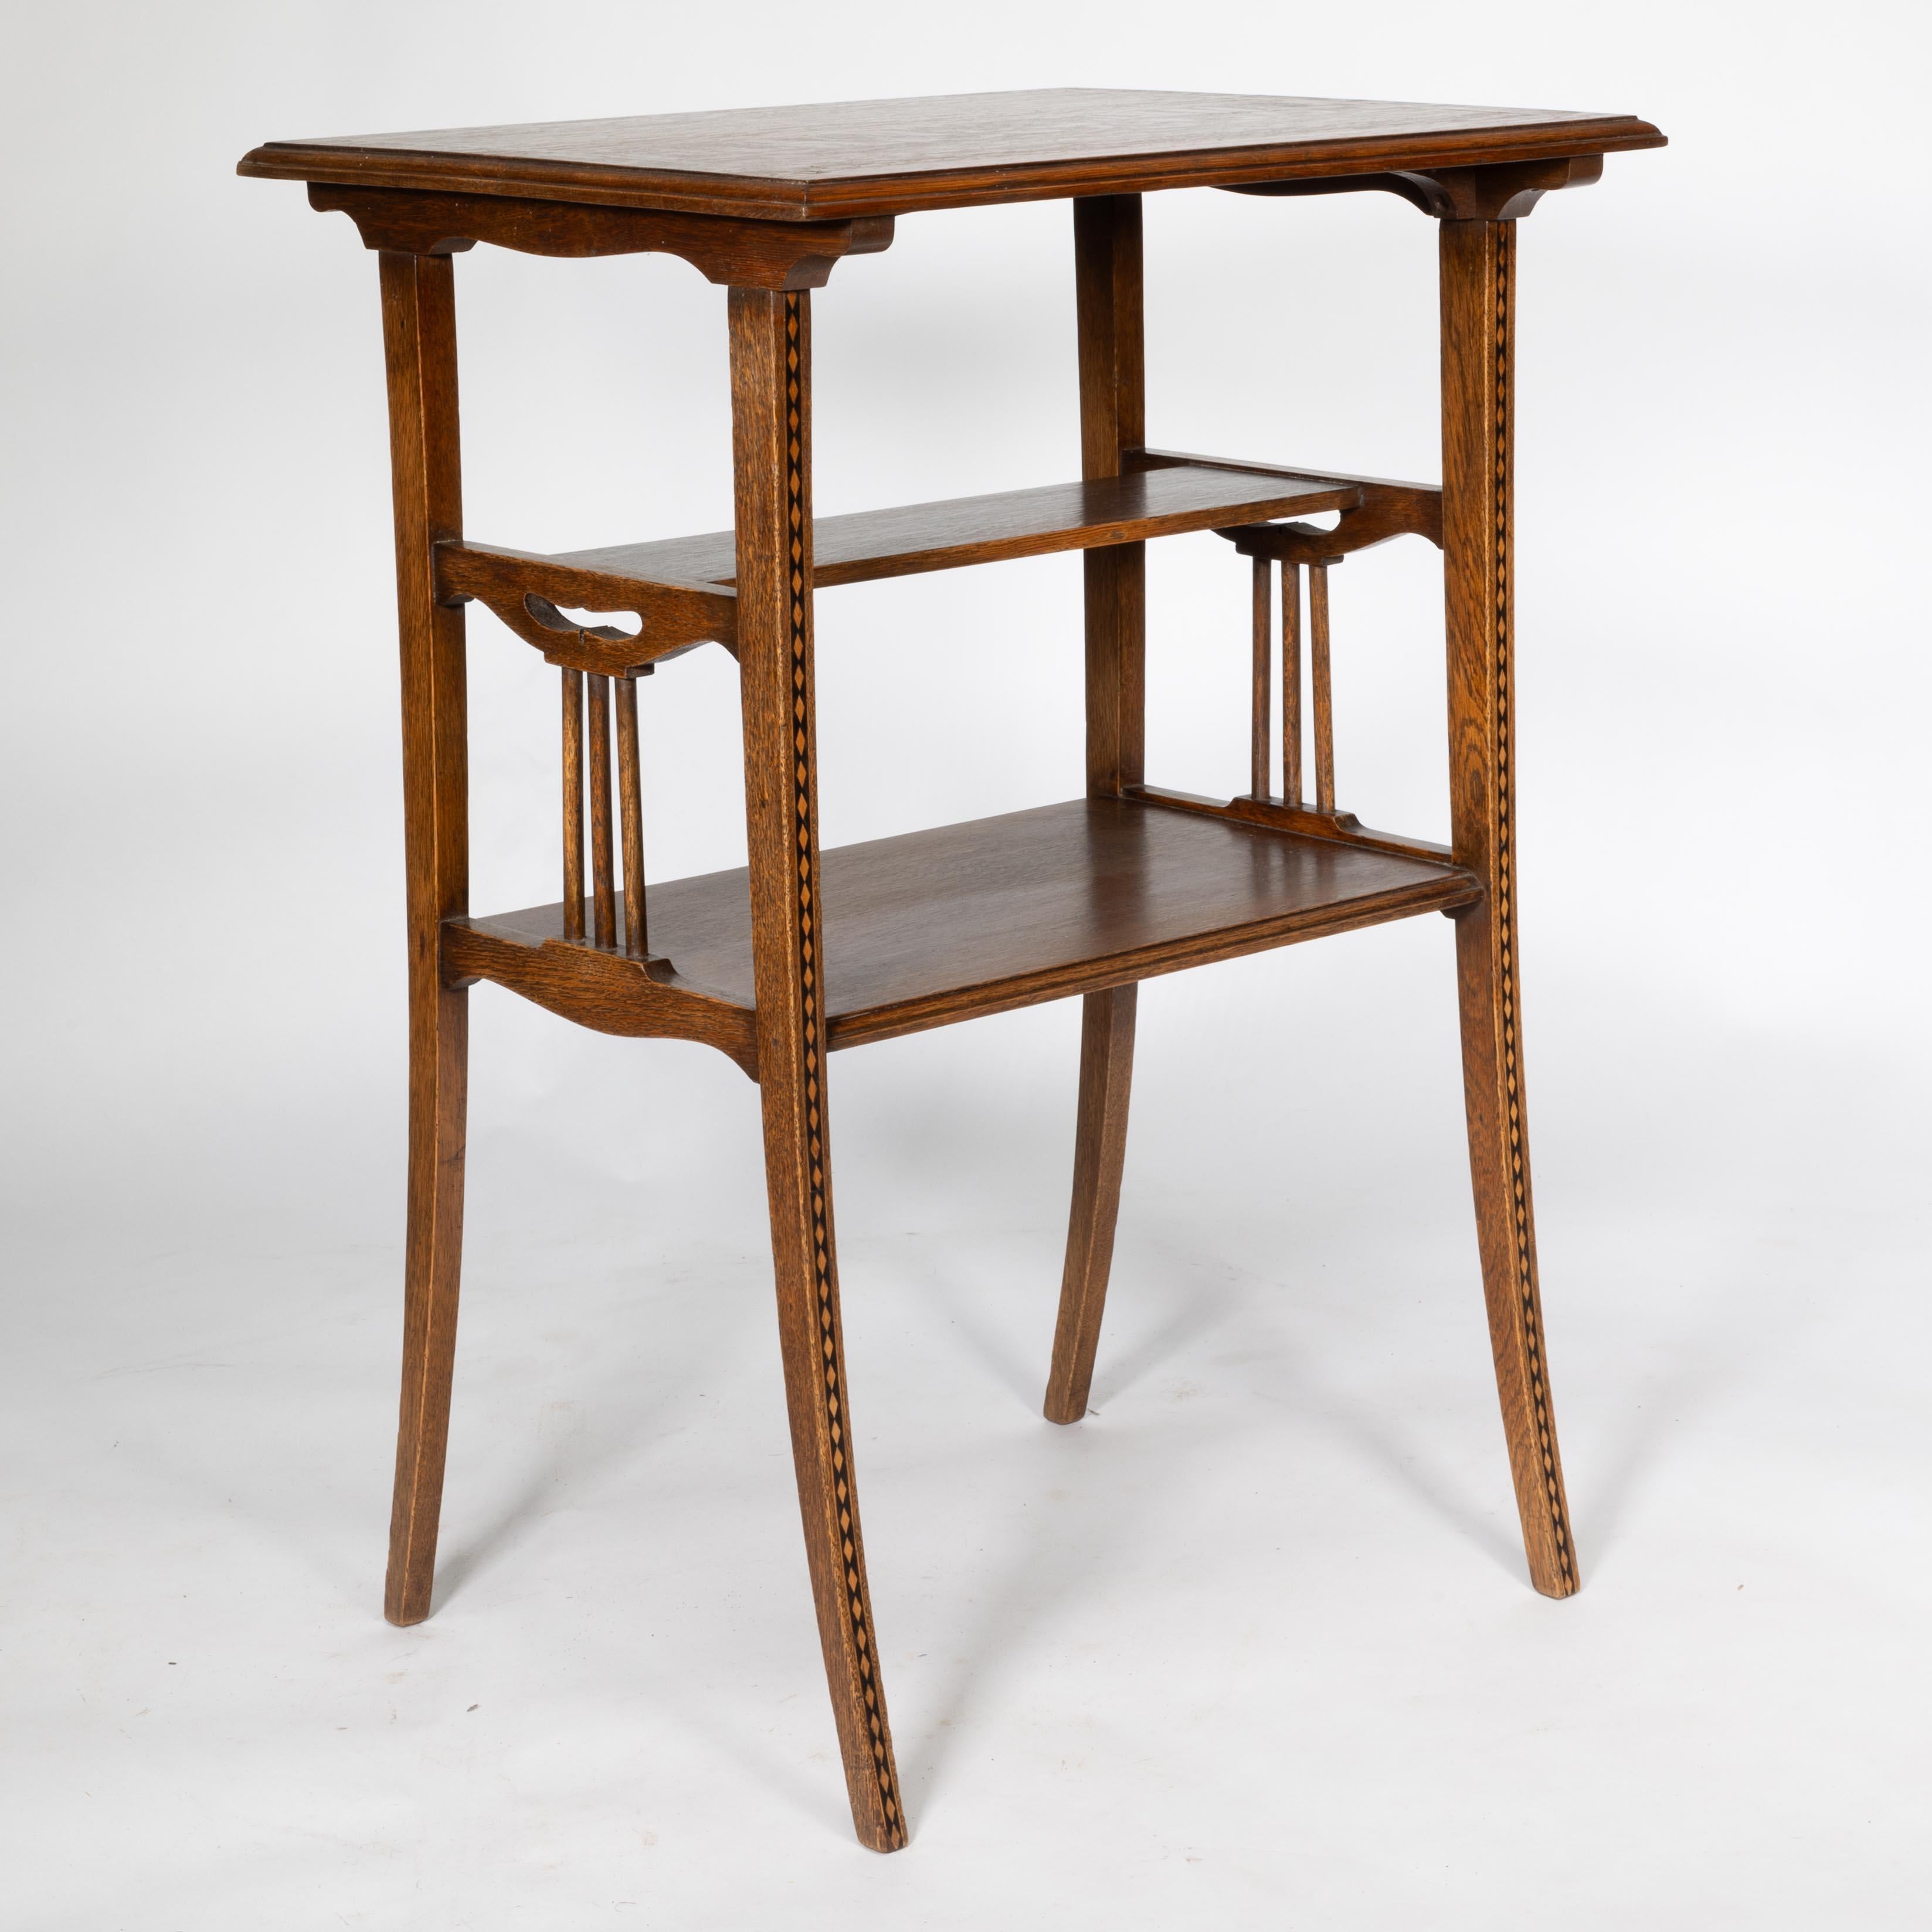 Late 19th Century George Walton style of. A pair of Arts & Crafts inlaid oak side table For Sale